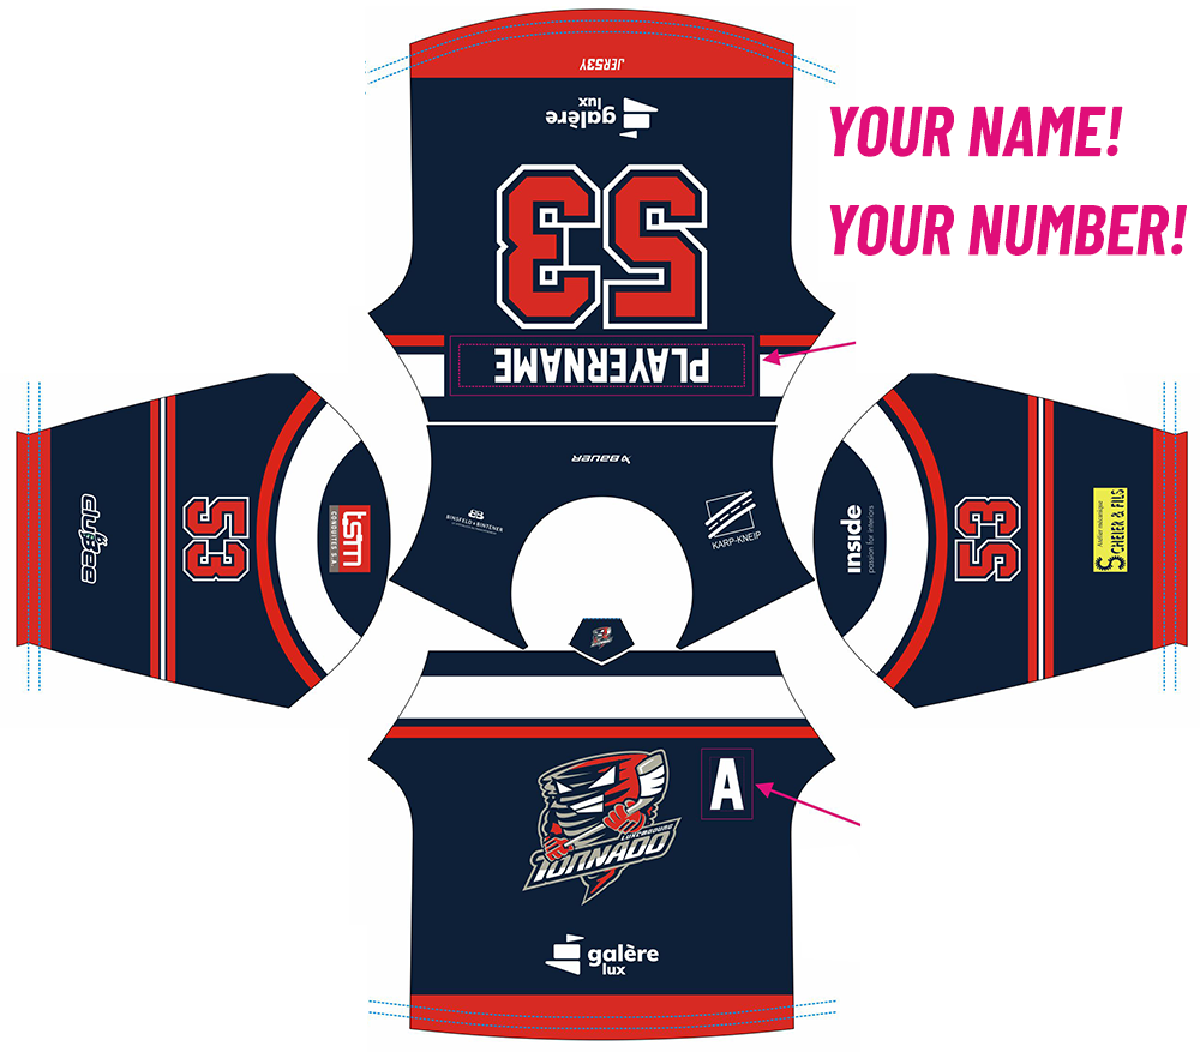 Order your custom-made Tornado jersey! (only now)